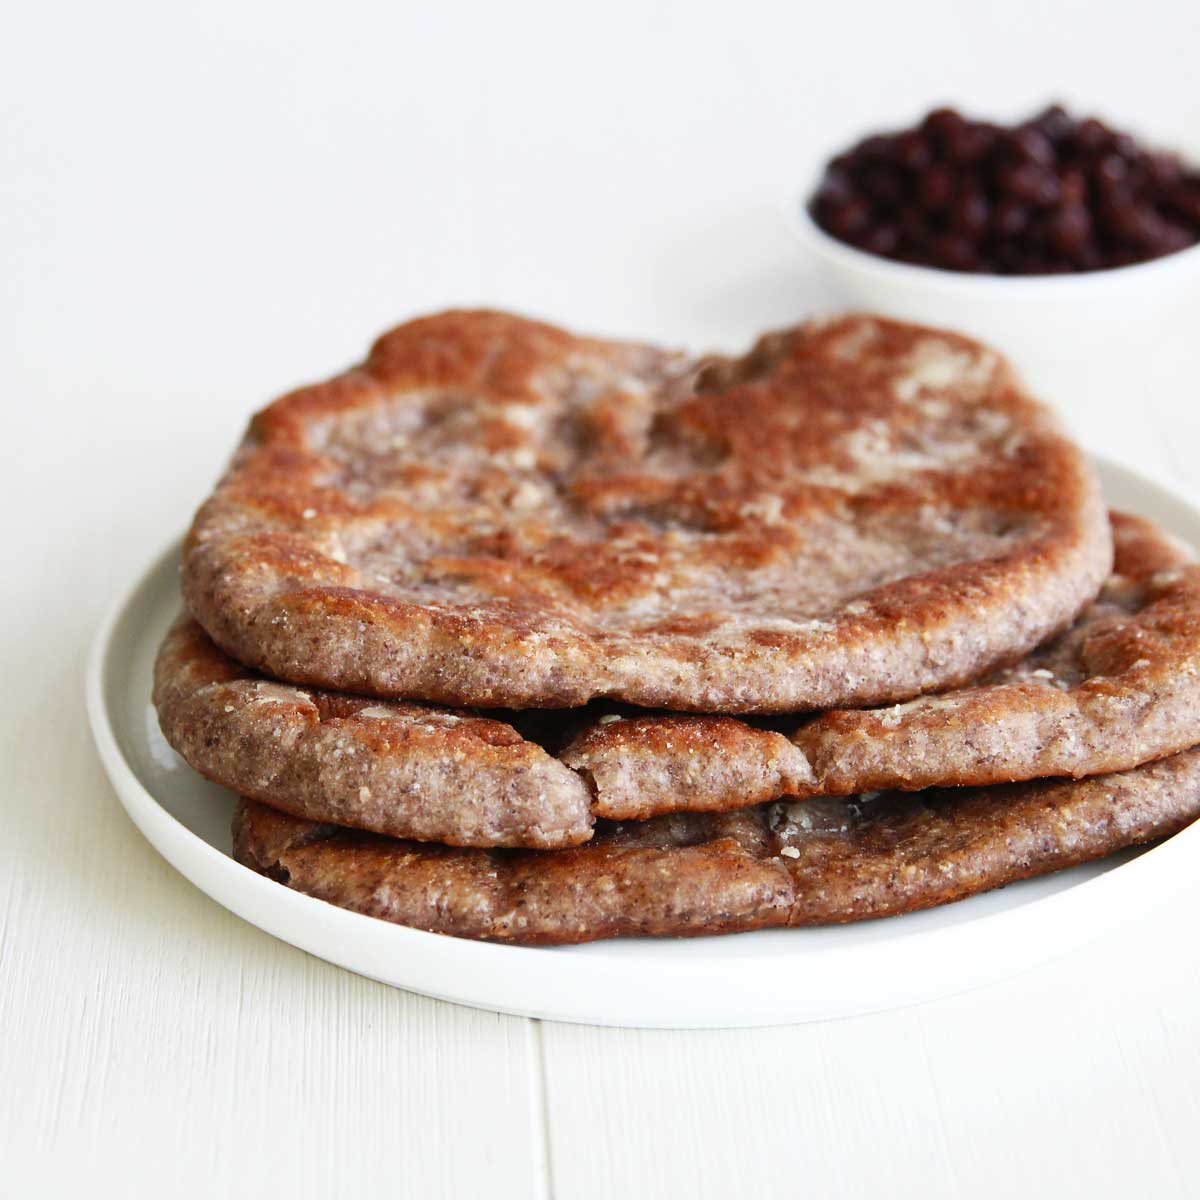 Black Bean Naan (Lower Carb Flatbread Made with Canned Black Beans) - Sweet Corn Flatbread